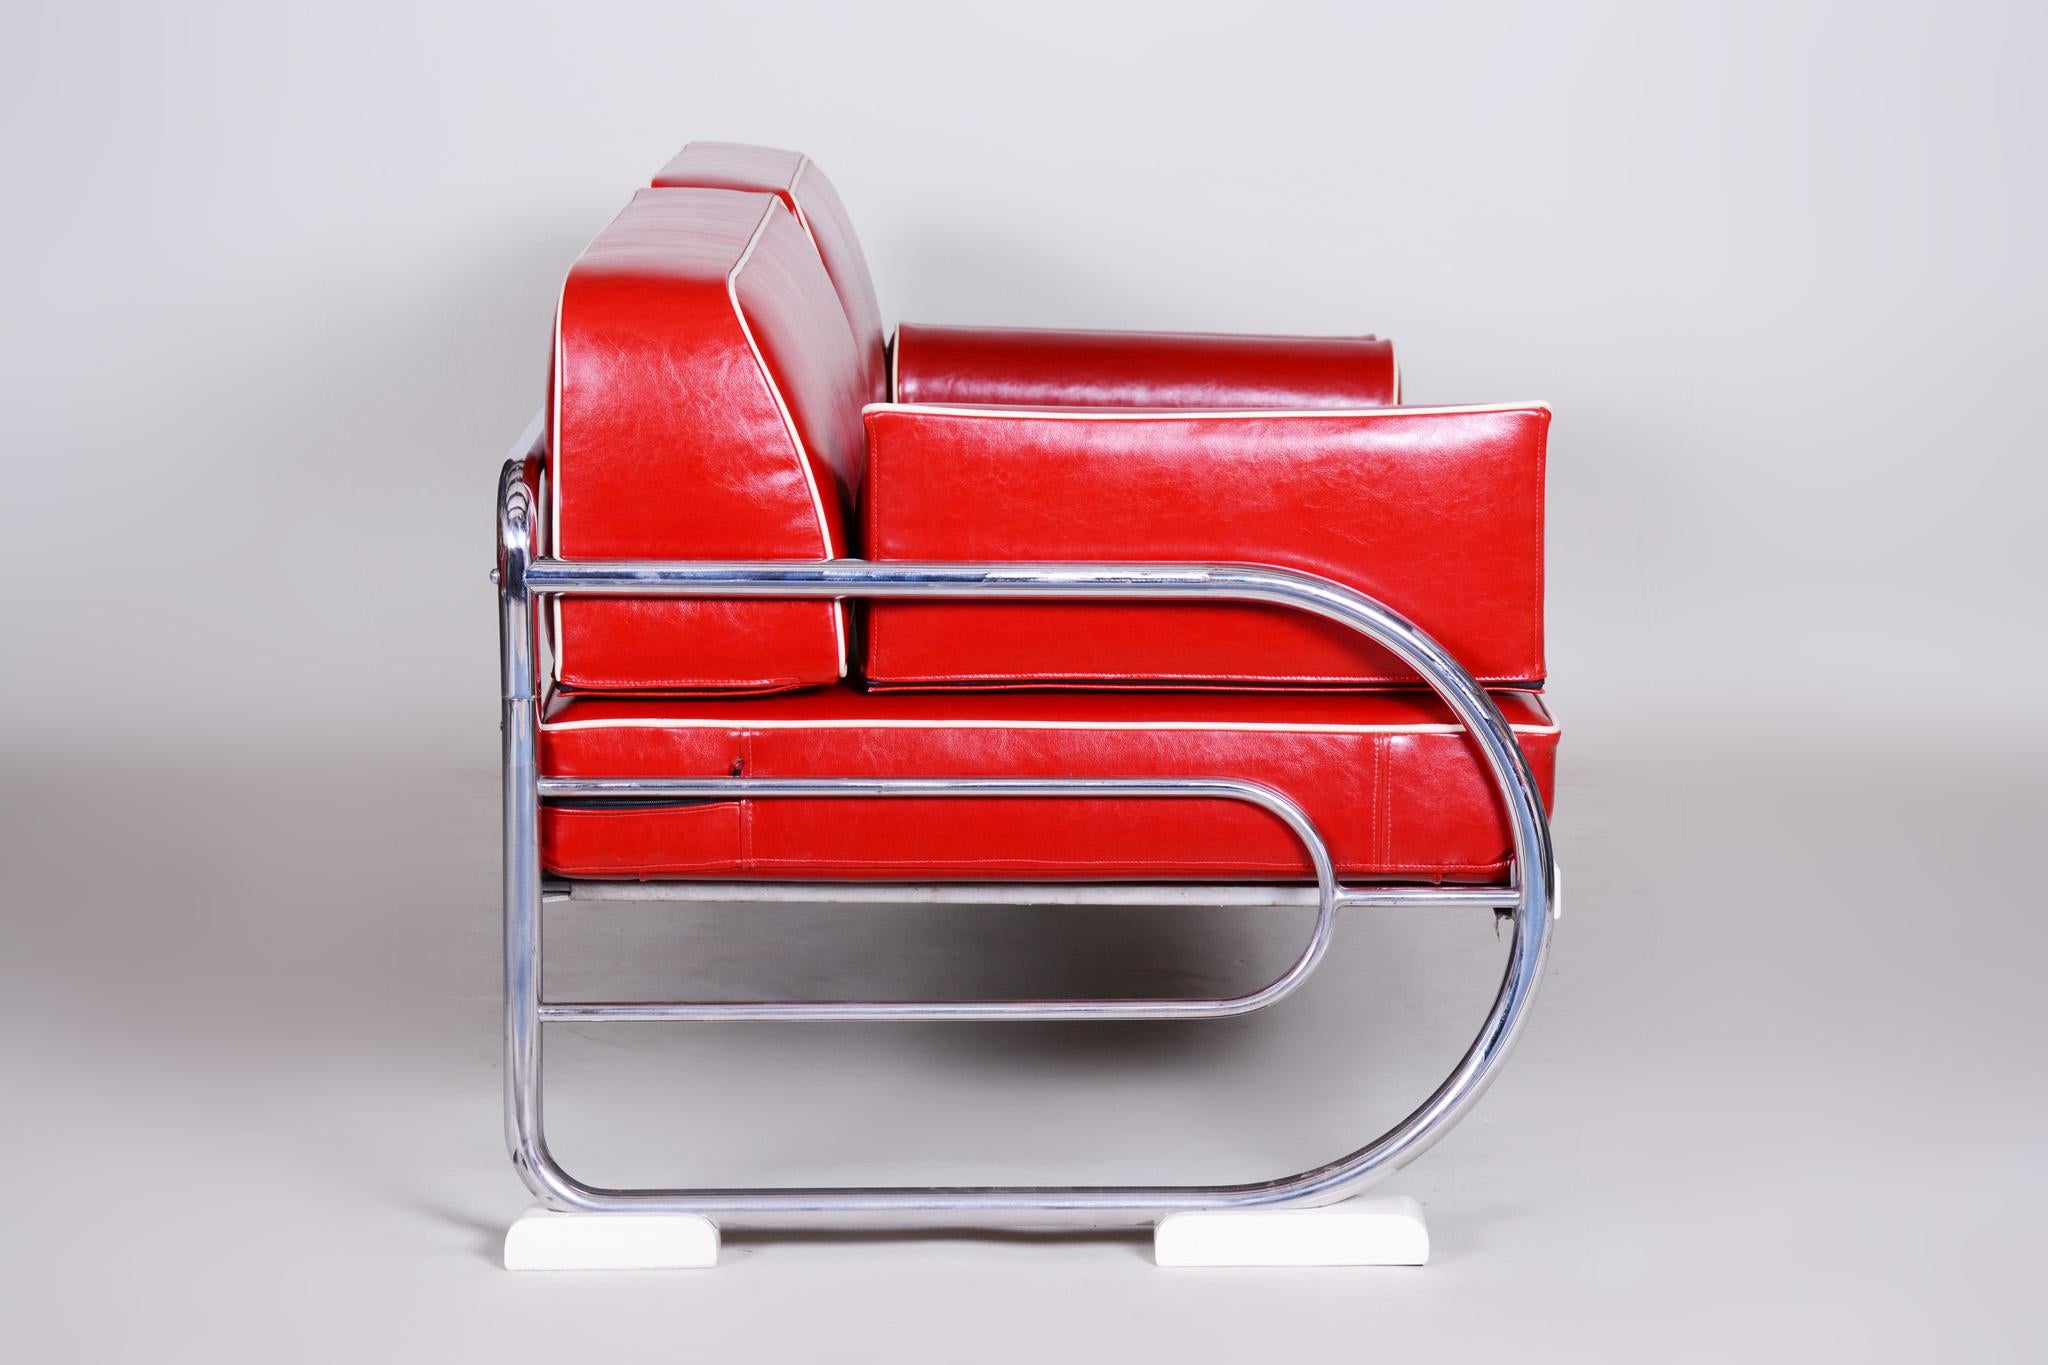 Bauhaus Red Tubular Chromed Steel Sofa by Robert Slezák, Design by Thonet, 1930s In Good Condition For Sale In Horomerice, CZ